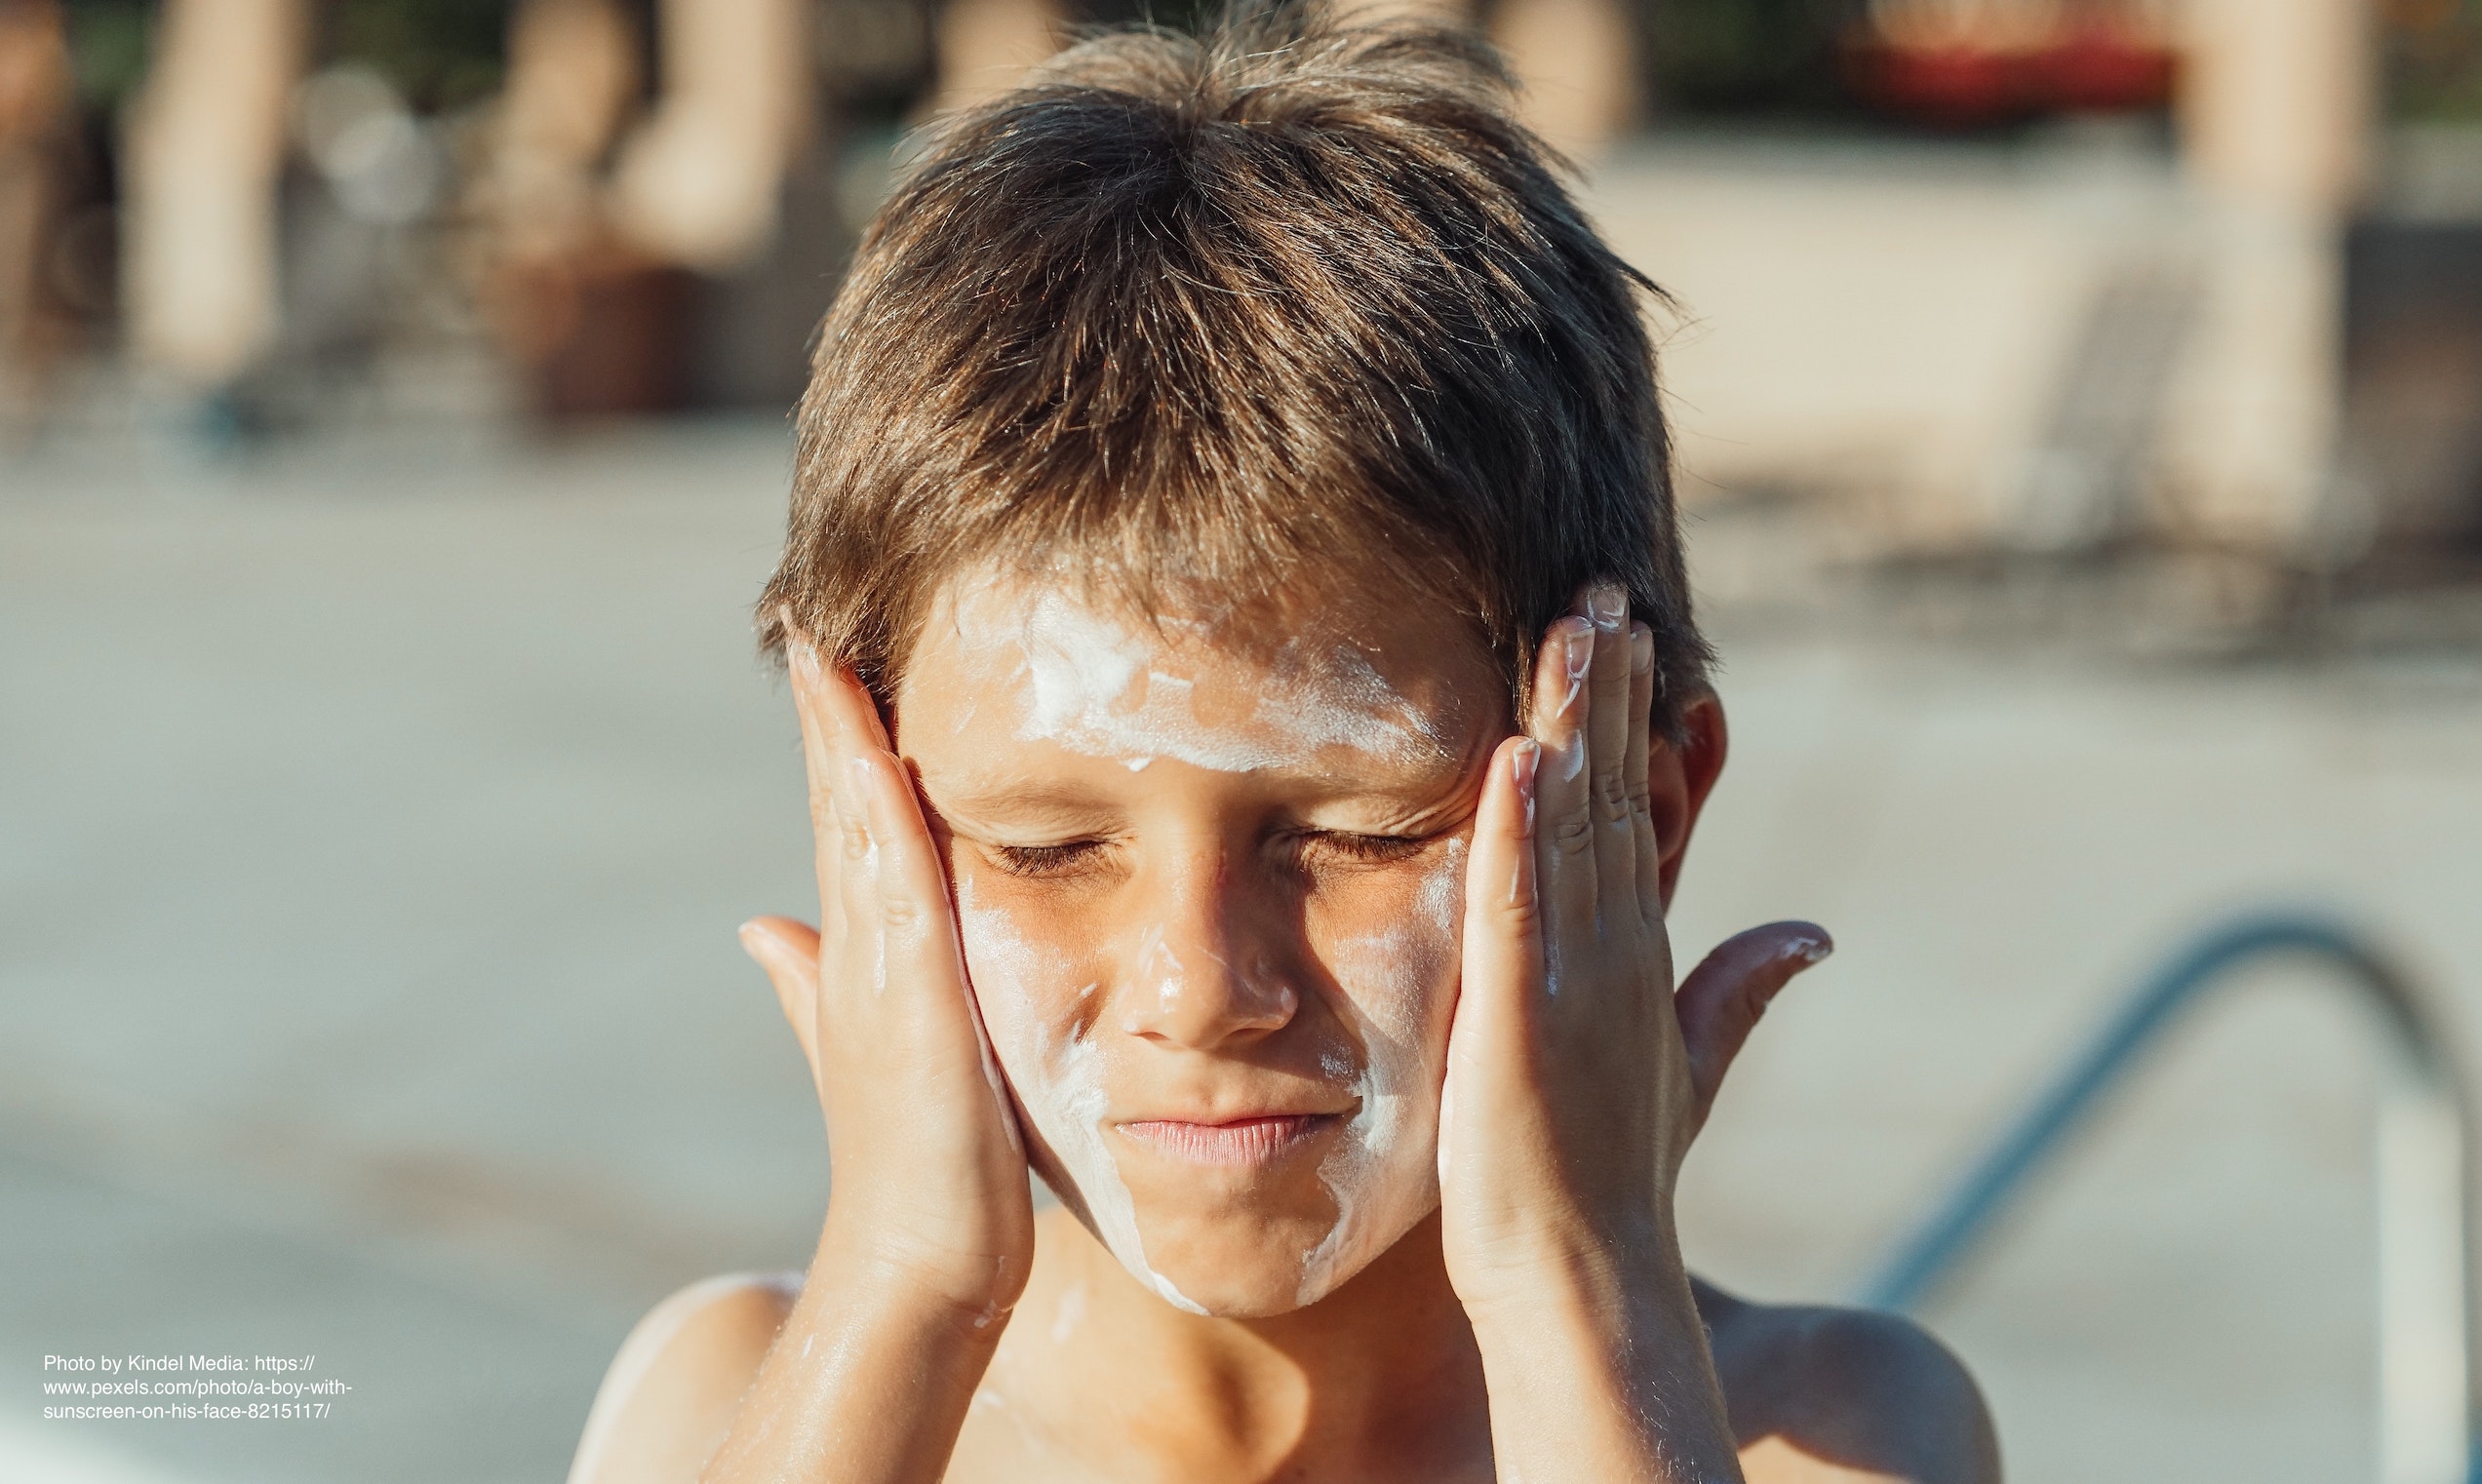 Looking after your skin in hot weather